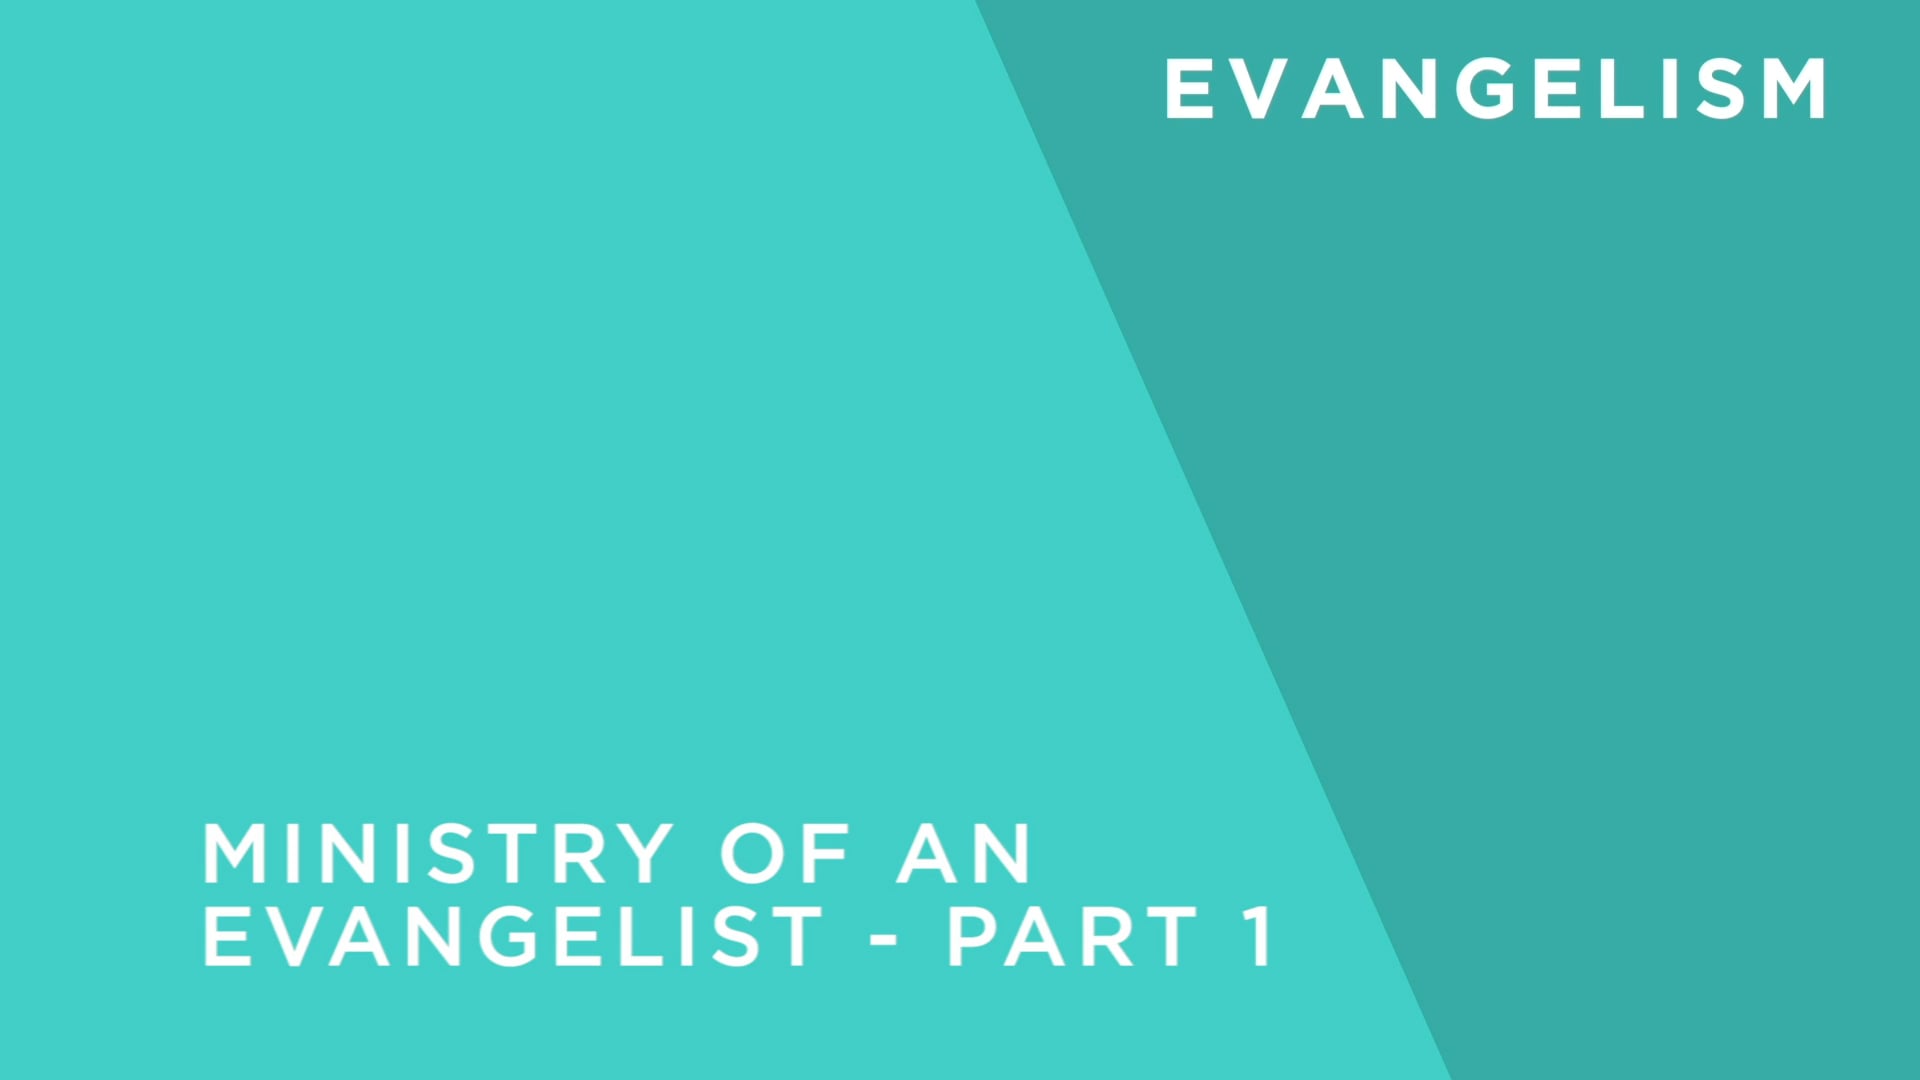 The Ministry of an Evangelist - Part 1